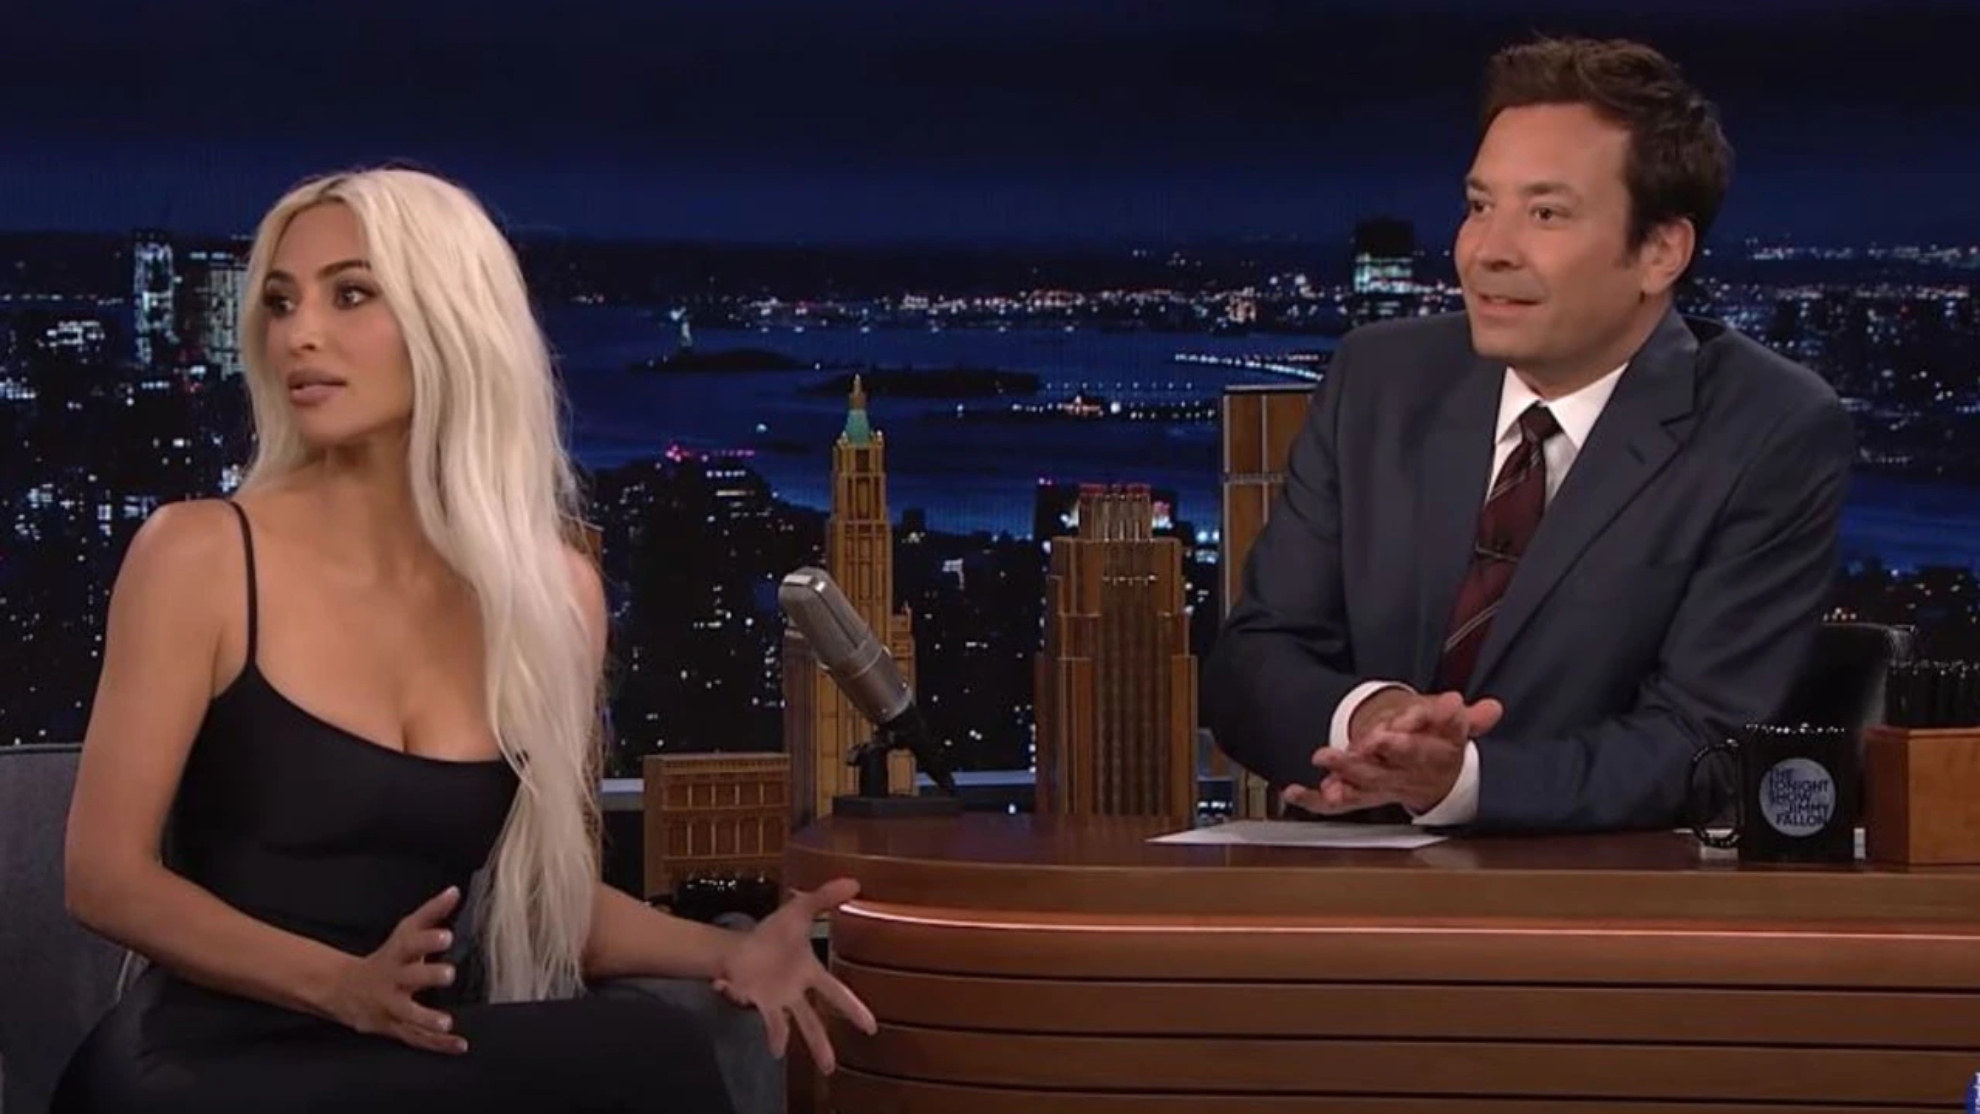 Kim Kardashian goes into mom mode mid-interview on The Tonight Show With Jimmy Fallon